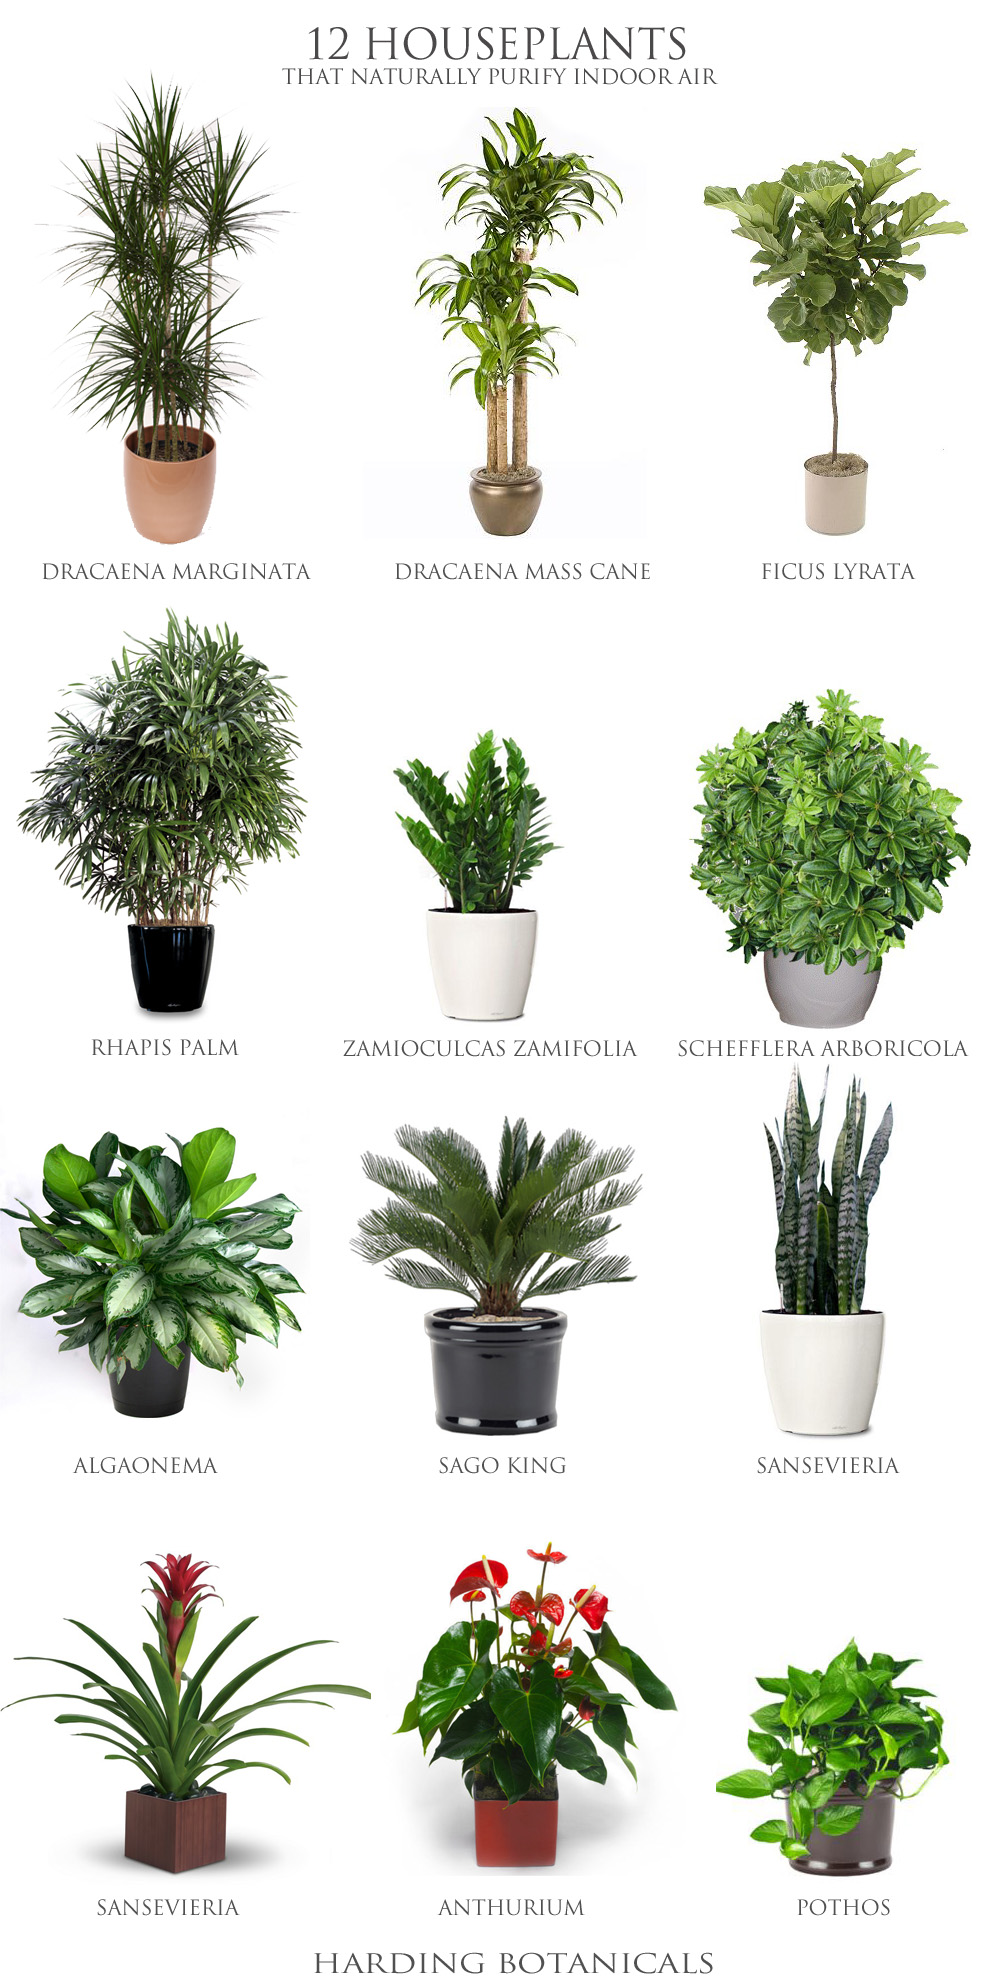 The Role of Houseplants in Purifying Indoor Air: Top Air-Cleansing Species